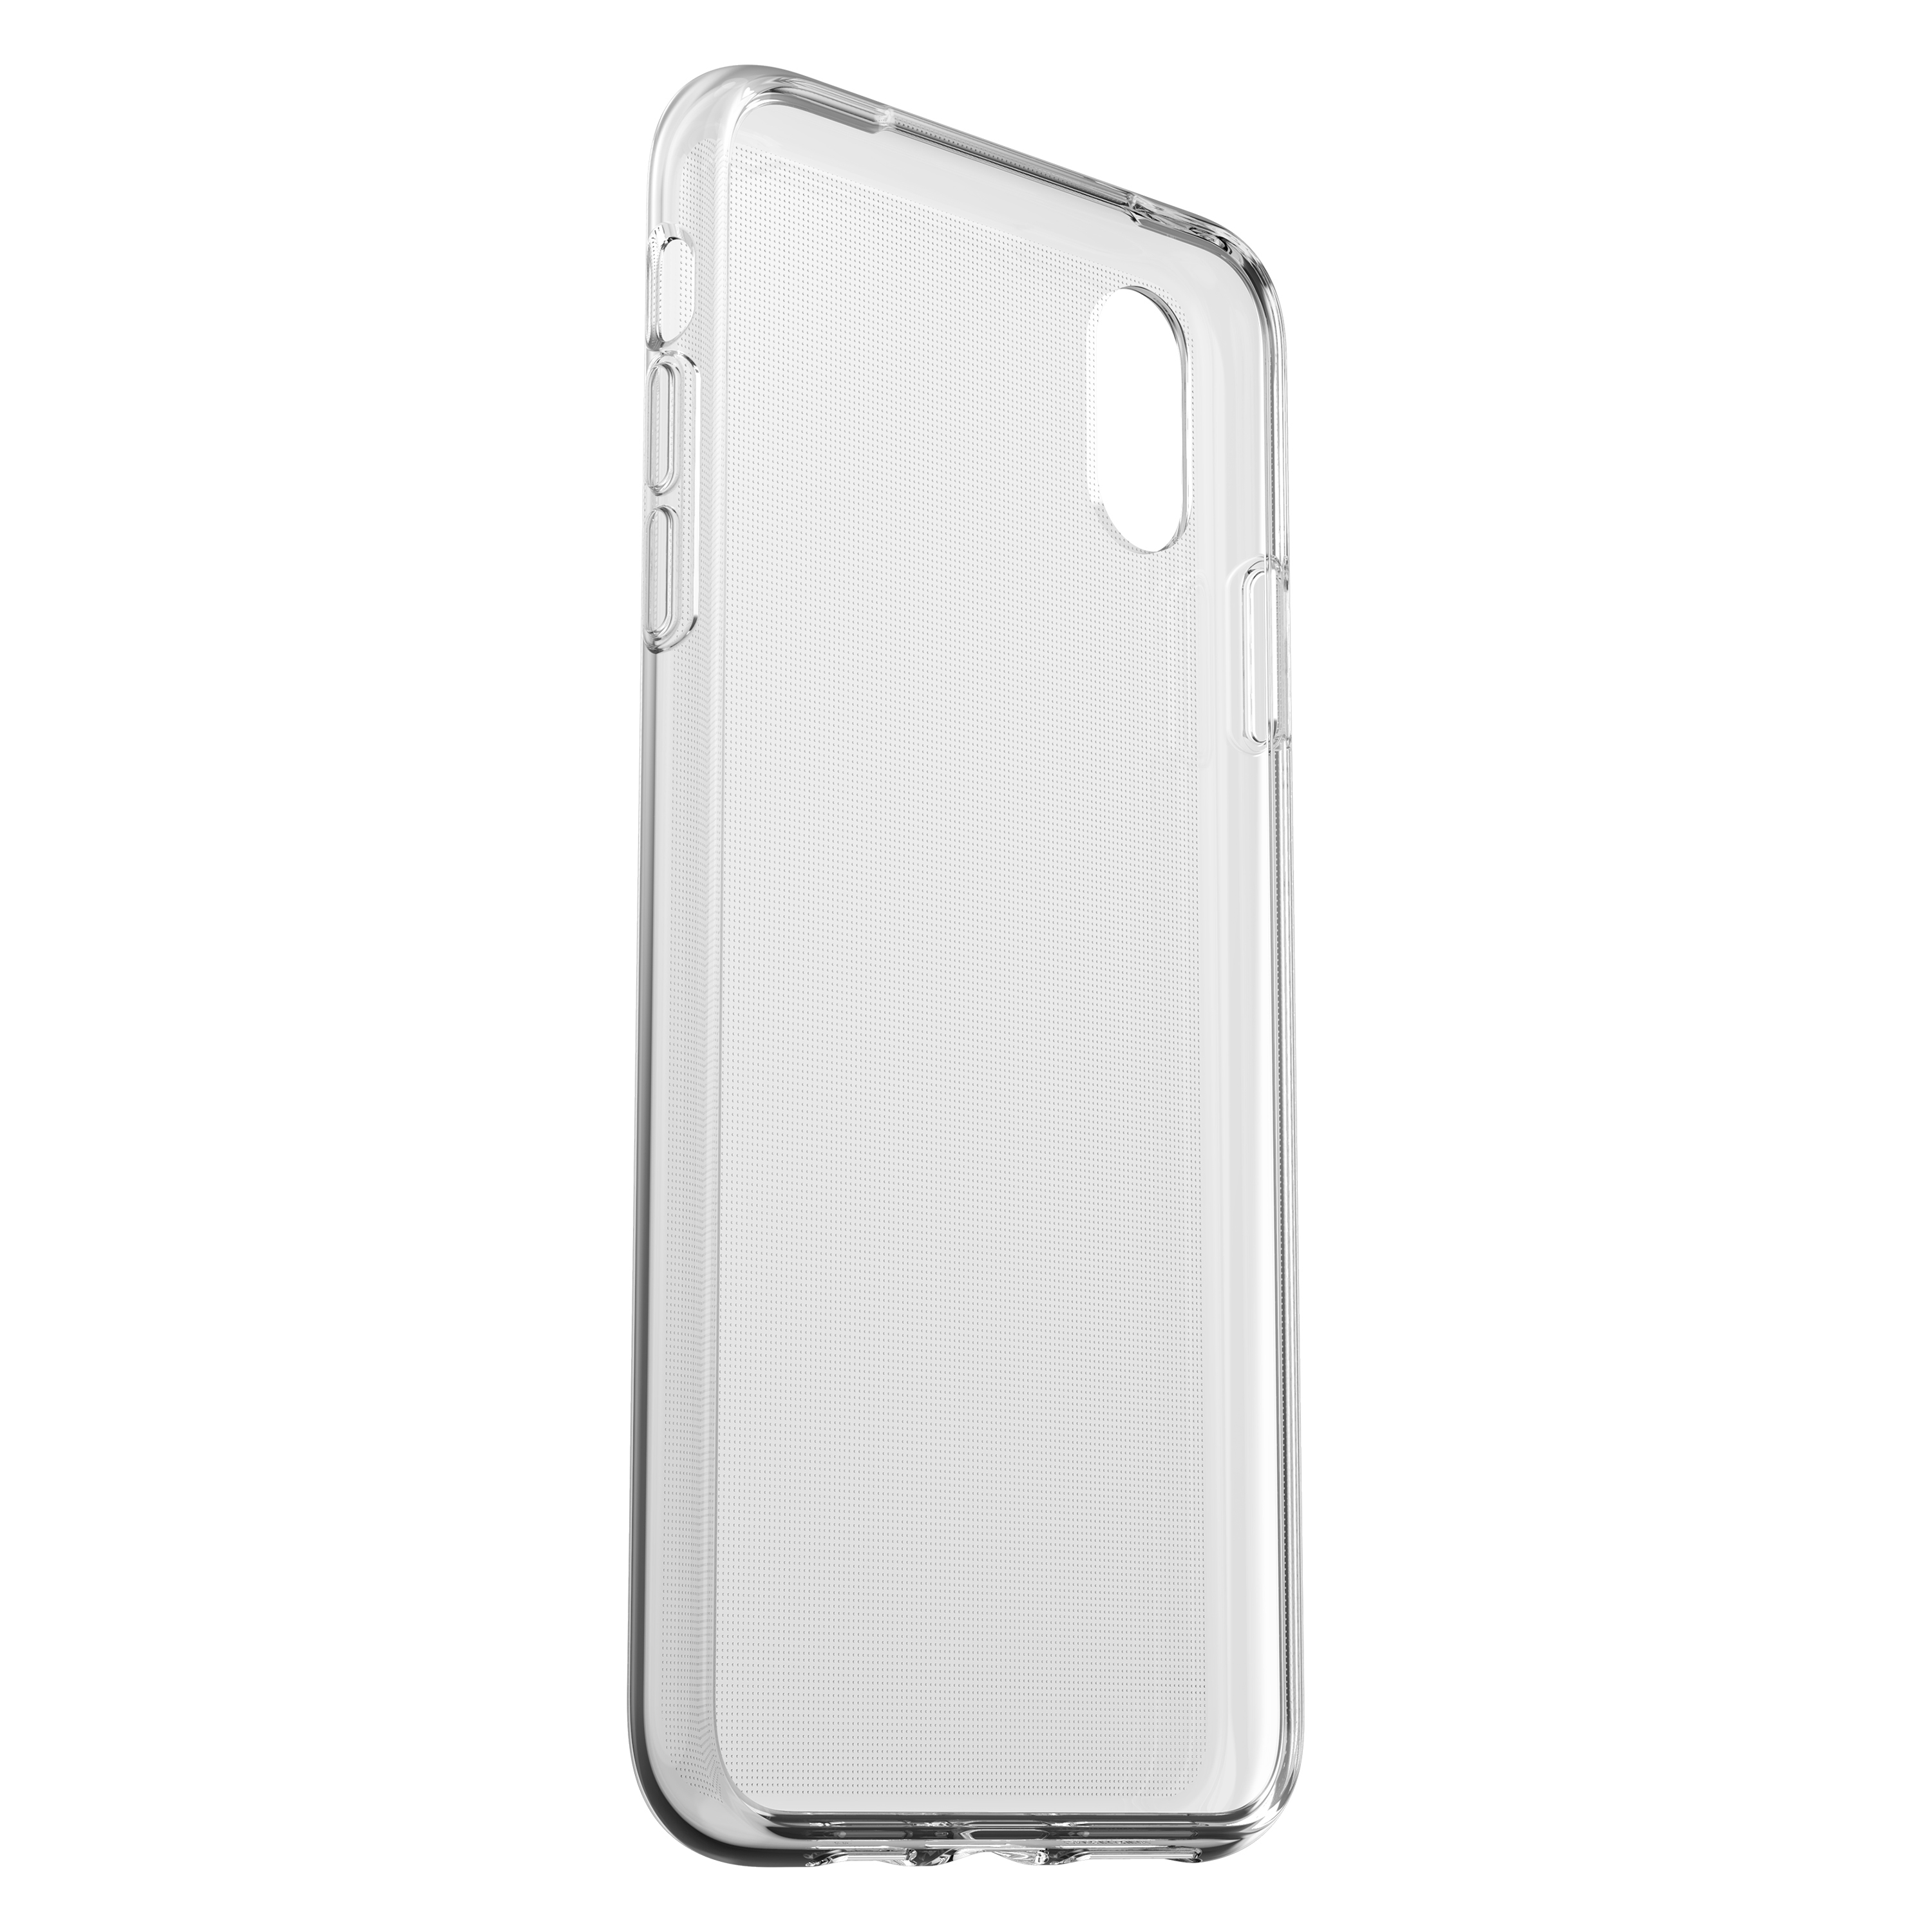 OTTERBOX Protected, Backcover, Max, Transparent iPhone XS Apple